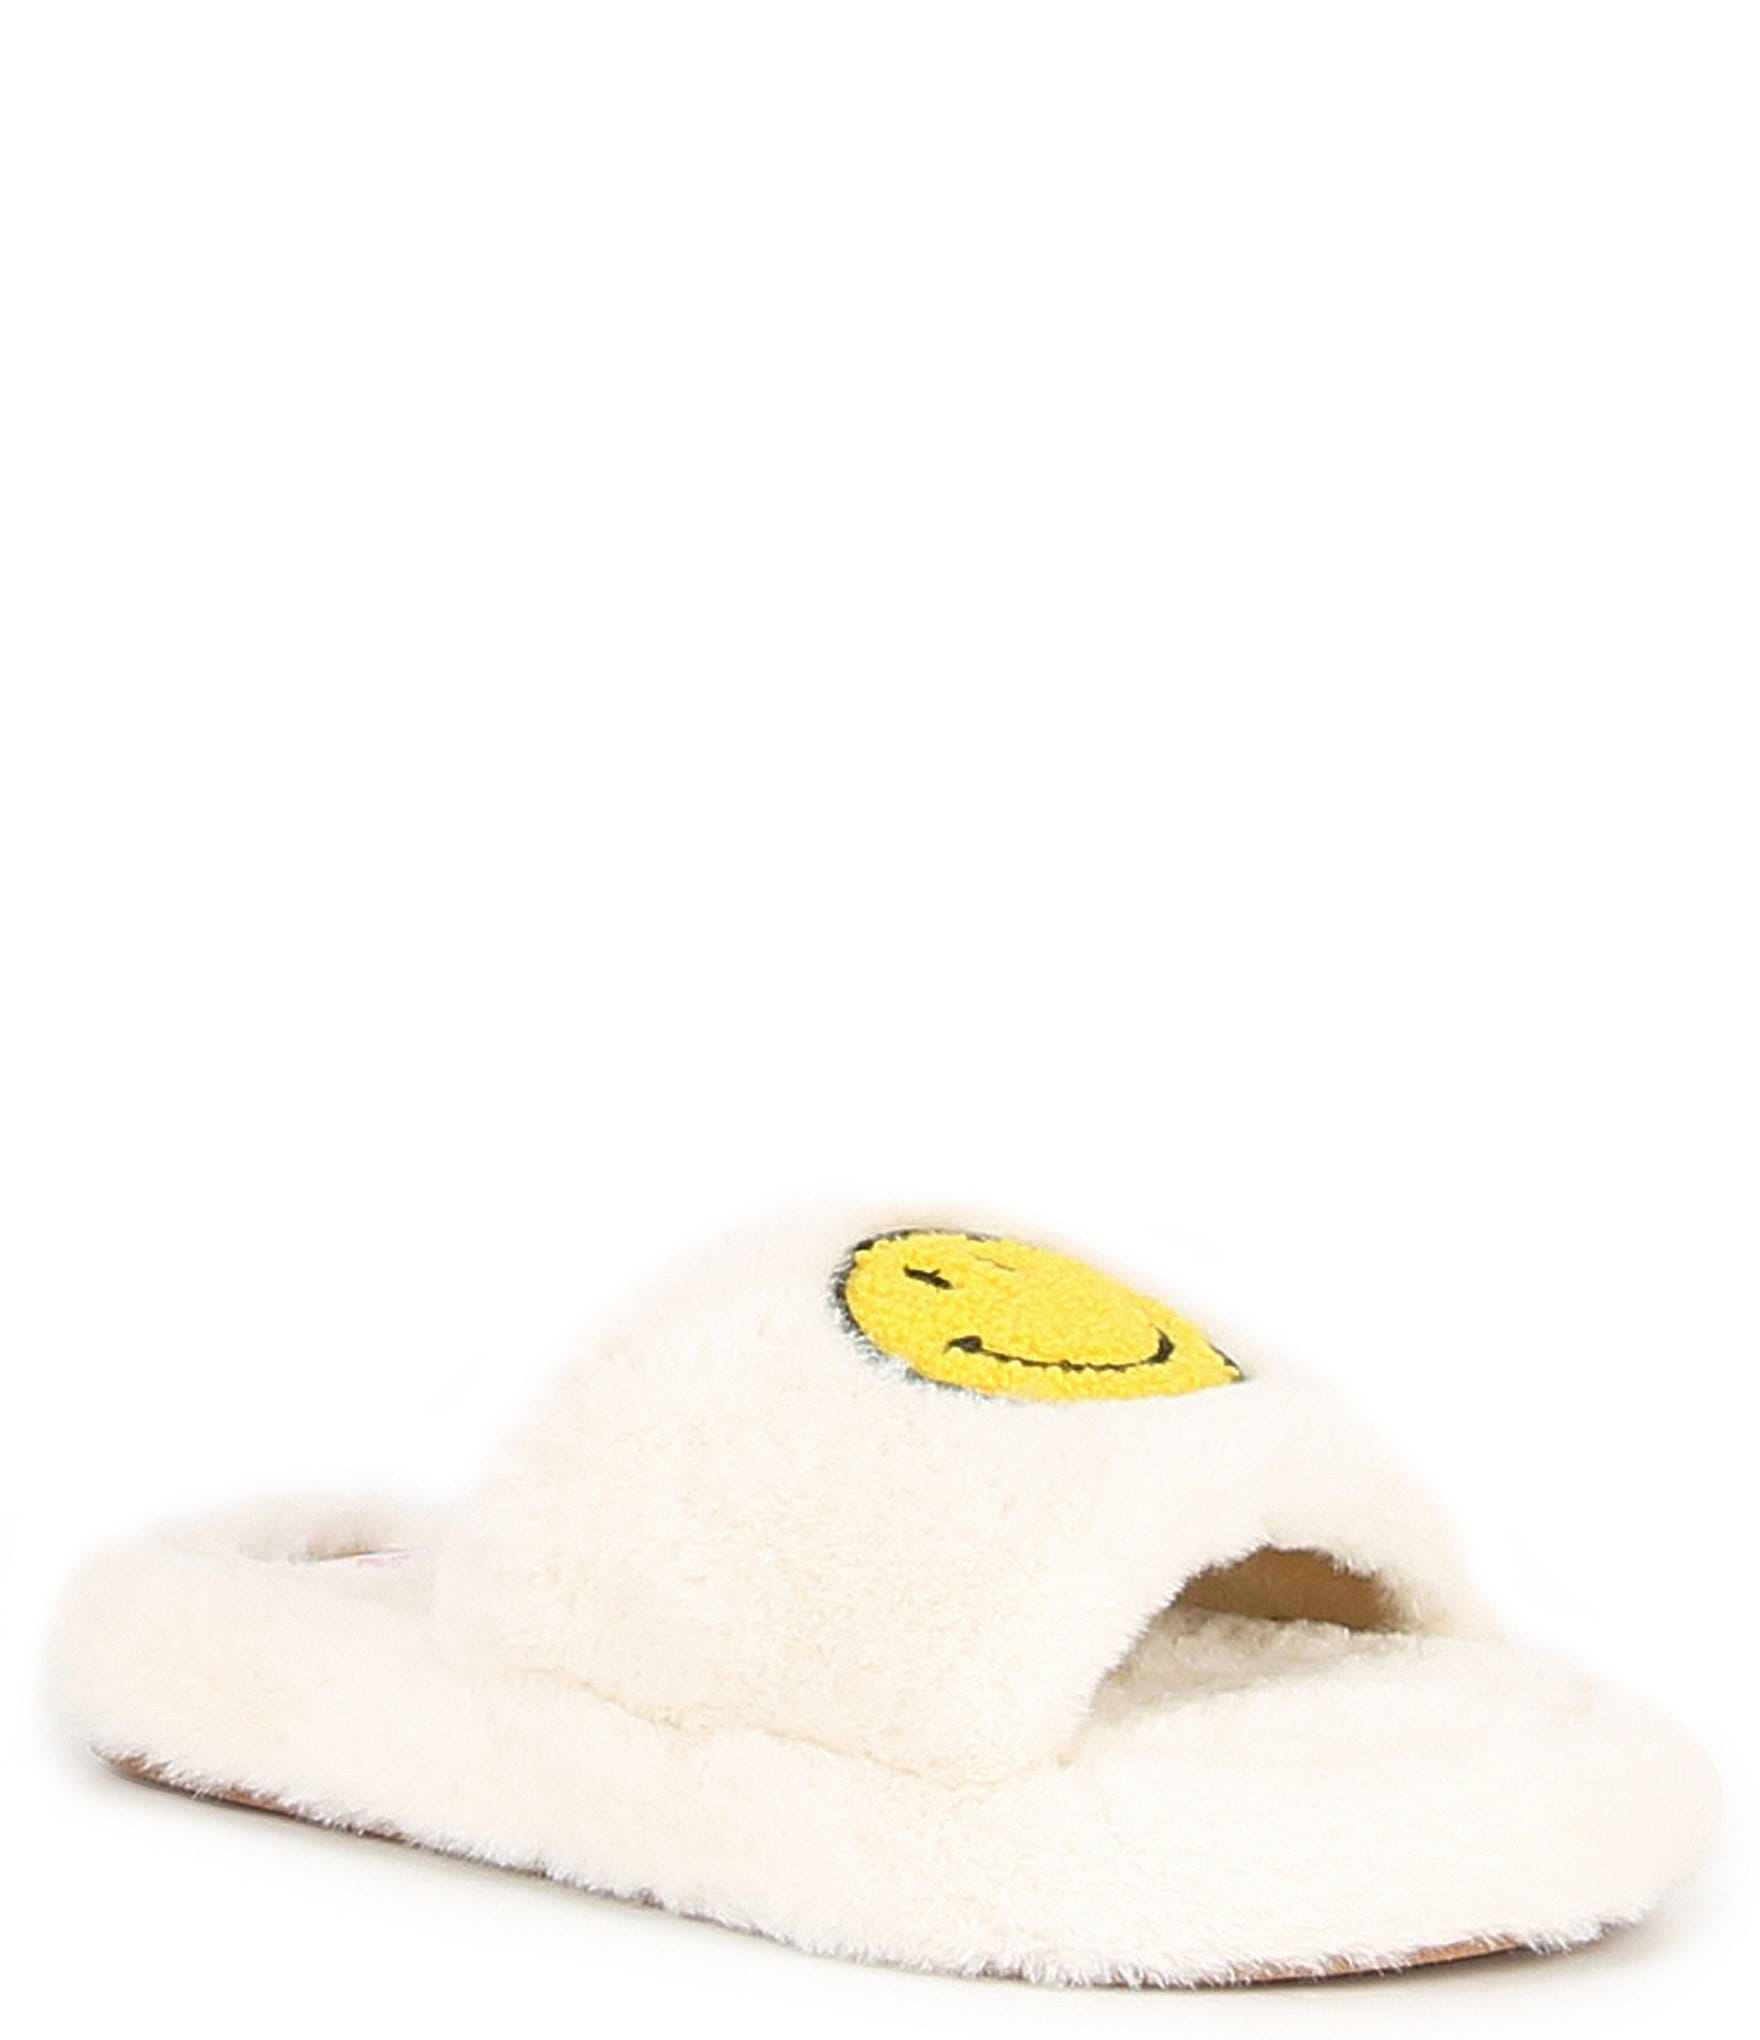 GB Girls' Smile Girl Smiley Face Slippers (Youth) |